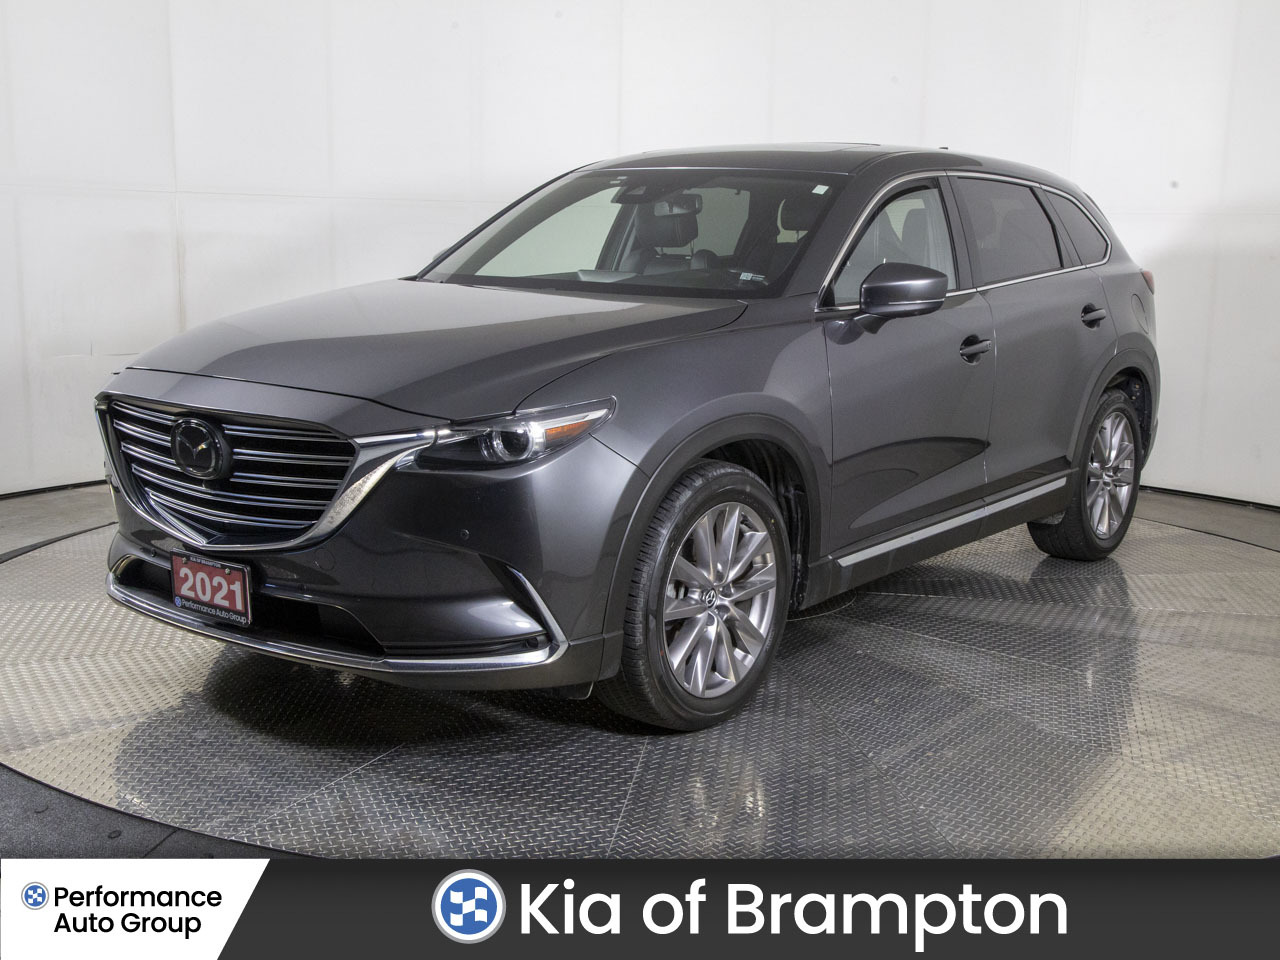 2021 Mazda CX-9 GT AWD 7 PASS CAP-CHAIRS LEATHER ROOF NAVI 360 CAM